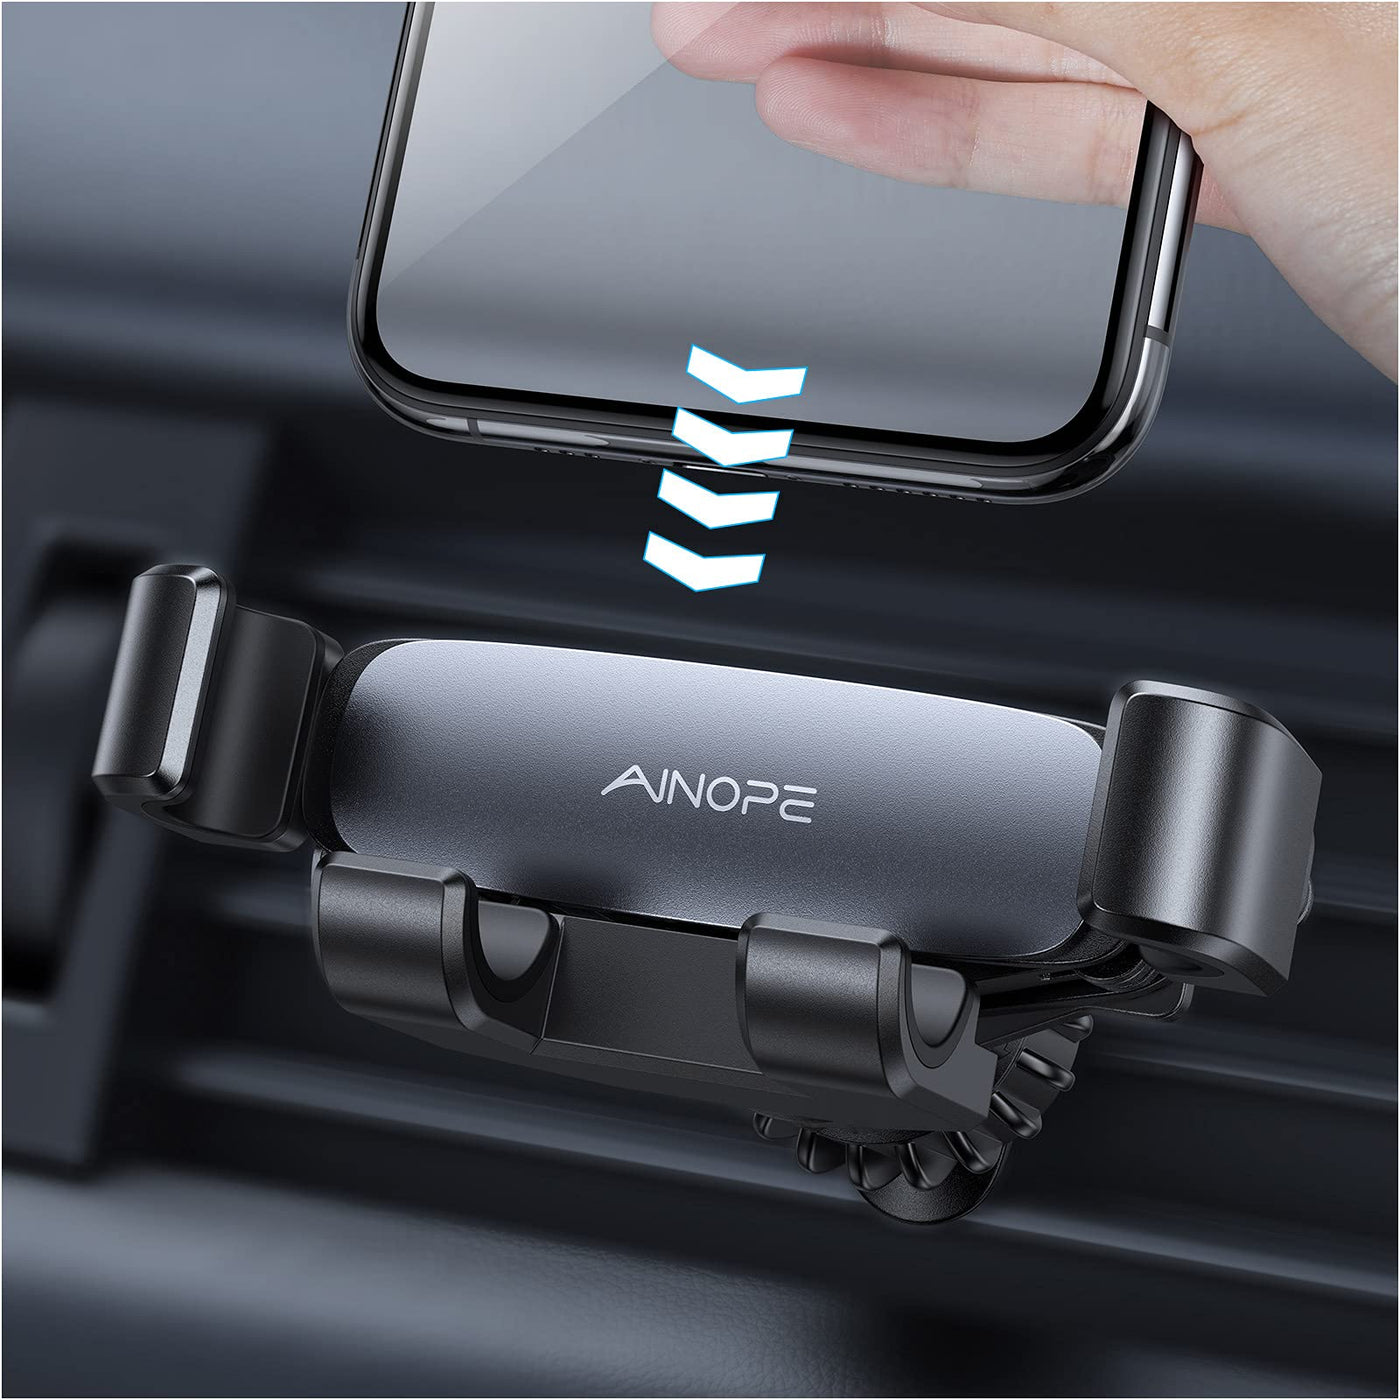 [Upgraded] Miracase Universal Magnetic Phone Holder for Car,[2nd Generation  Vent Clip&Strong Magnets] Hands Free Car Phone Mount, Air Vent Cell Phone